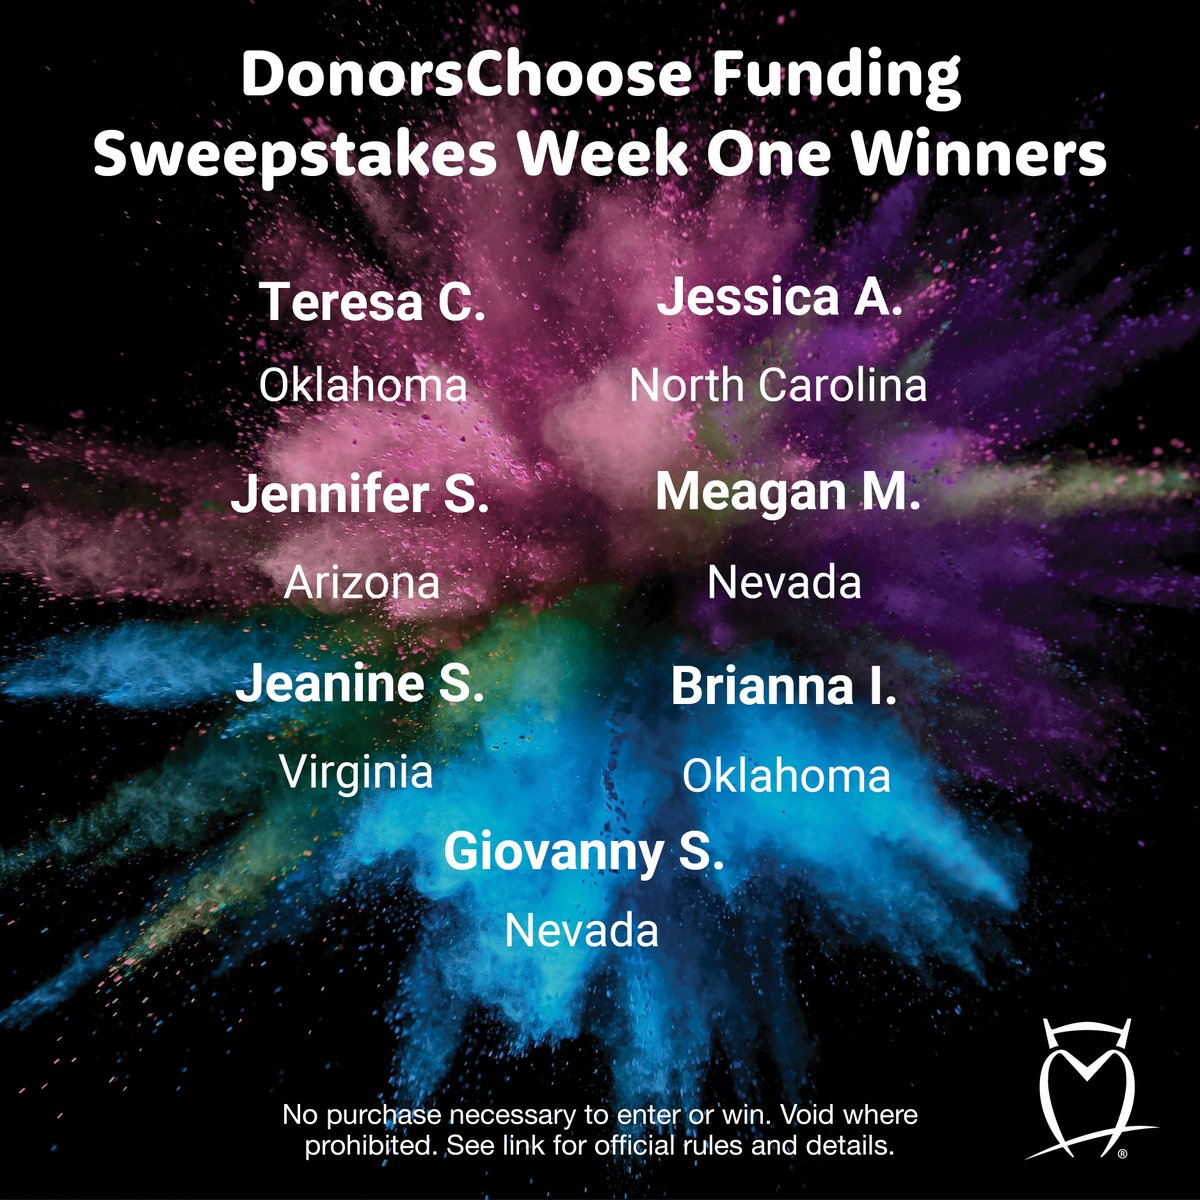 Congratulations to our week one winners! We still have four more weeks of our sweepstakes, and we’ll announce more winners next Thursday. Enter your DonorsChoose project before April 11 for your chance to get it fully funded! Enter here: ow.ly/uIGX50QTFwx